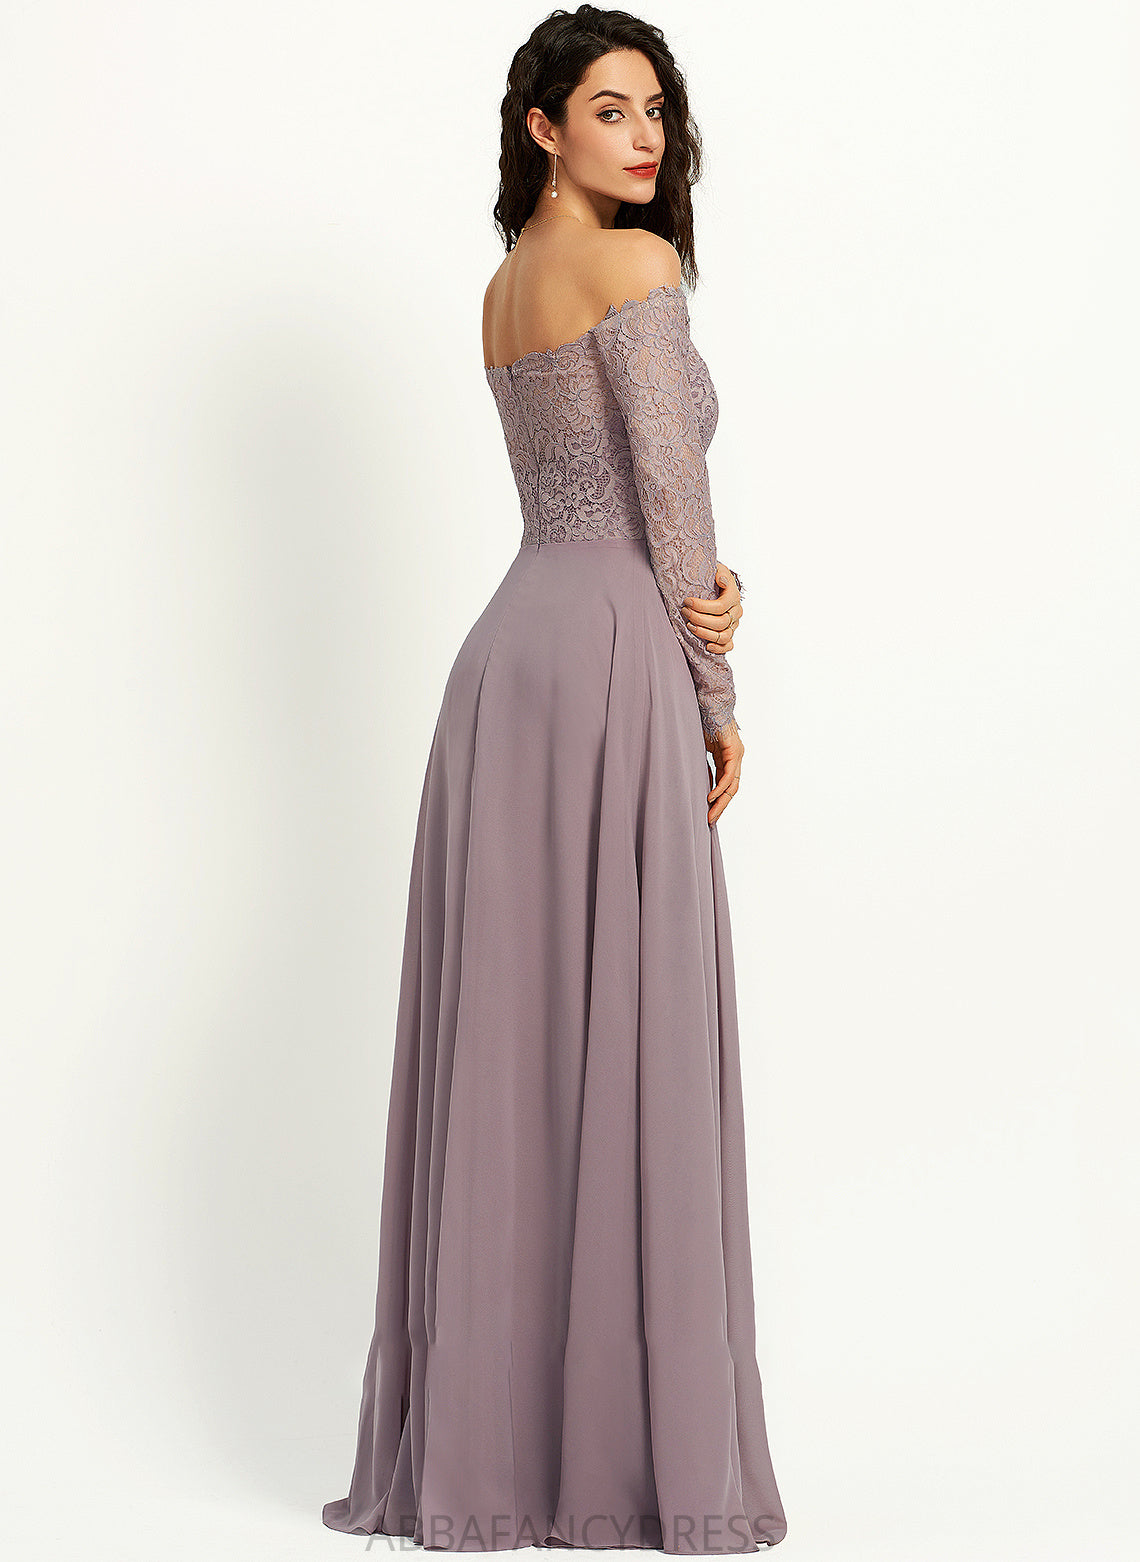 Neckline Fabric Lace Length Floor-Length Off-the-Shoulder Silhouette A-Line Straps Mallory V-Neck Natural Waist